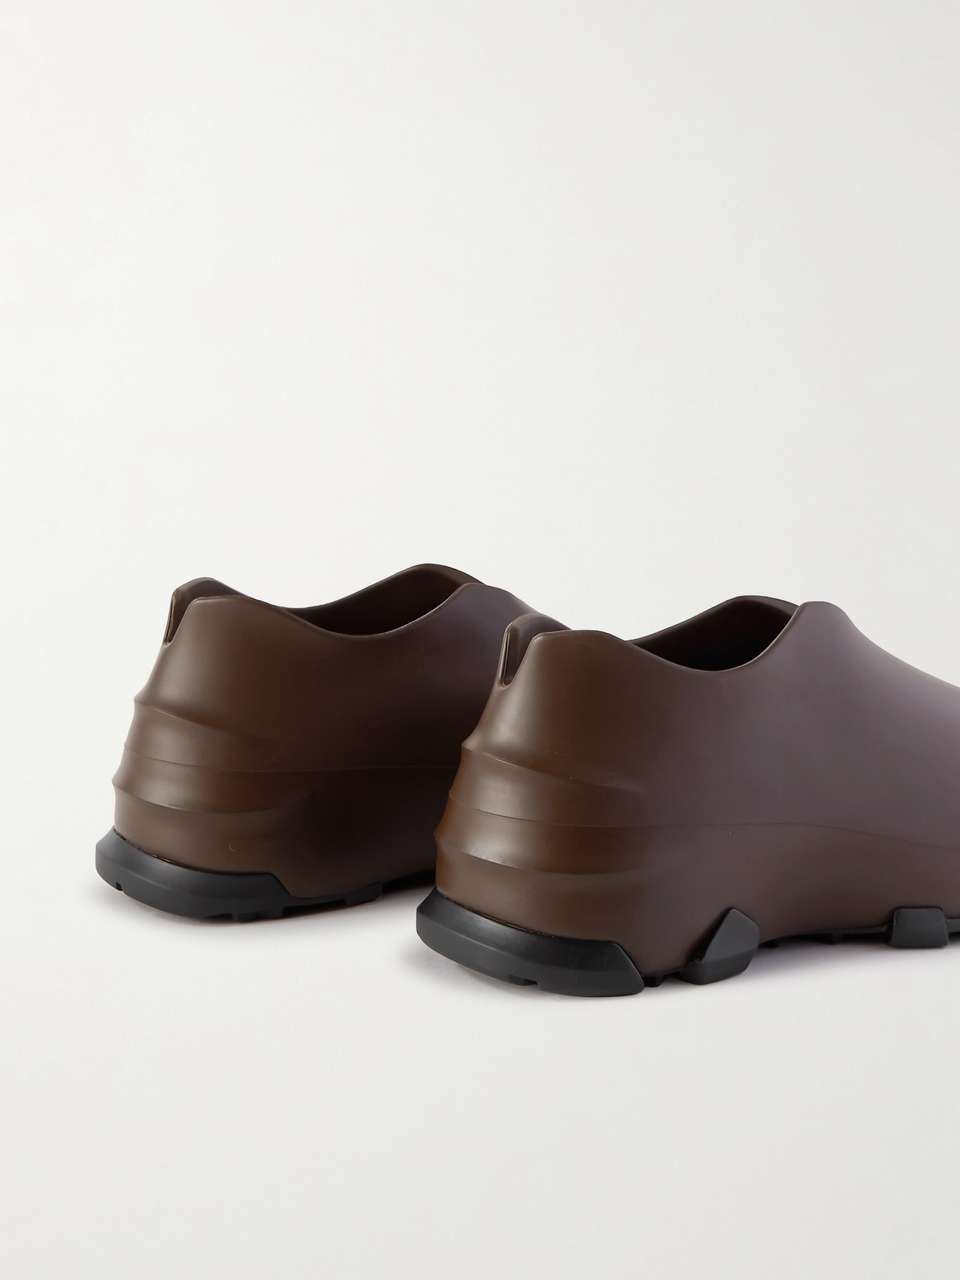 Dark brown Monumental Mallow Rubber Sneakers | GIVENCHY | MR PORTER